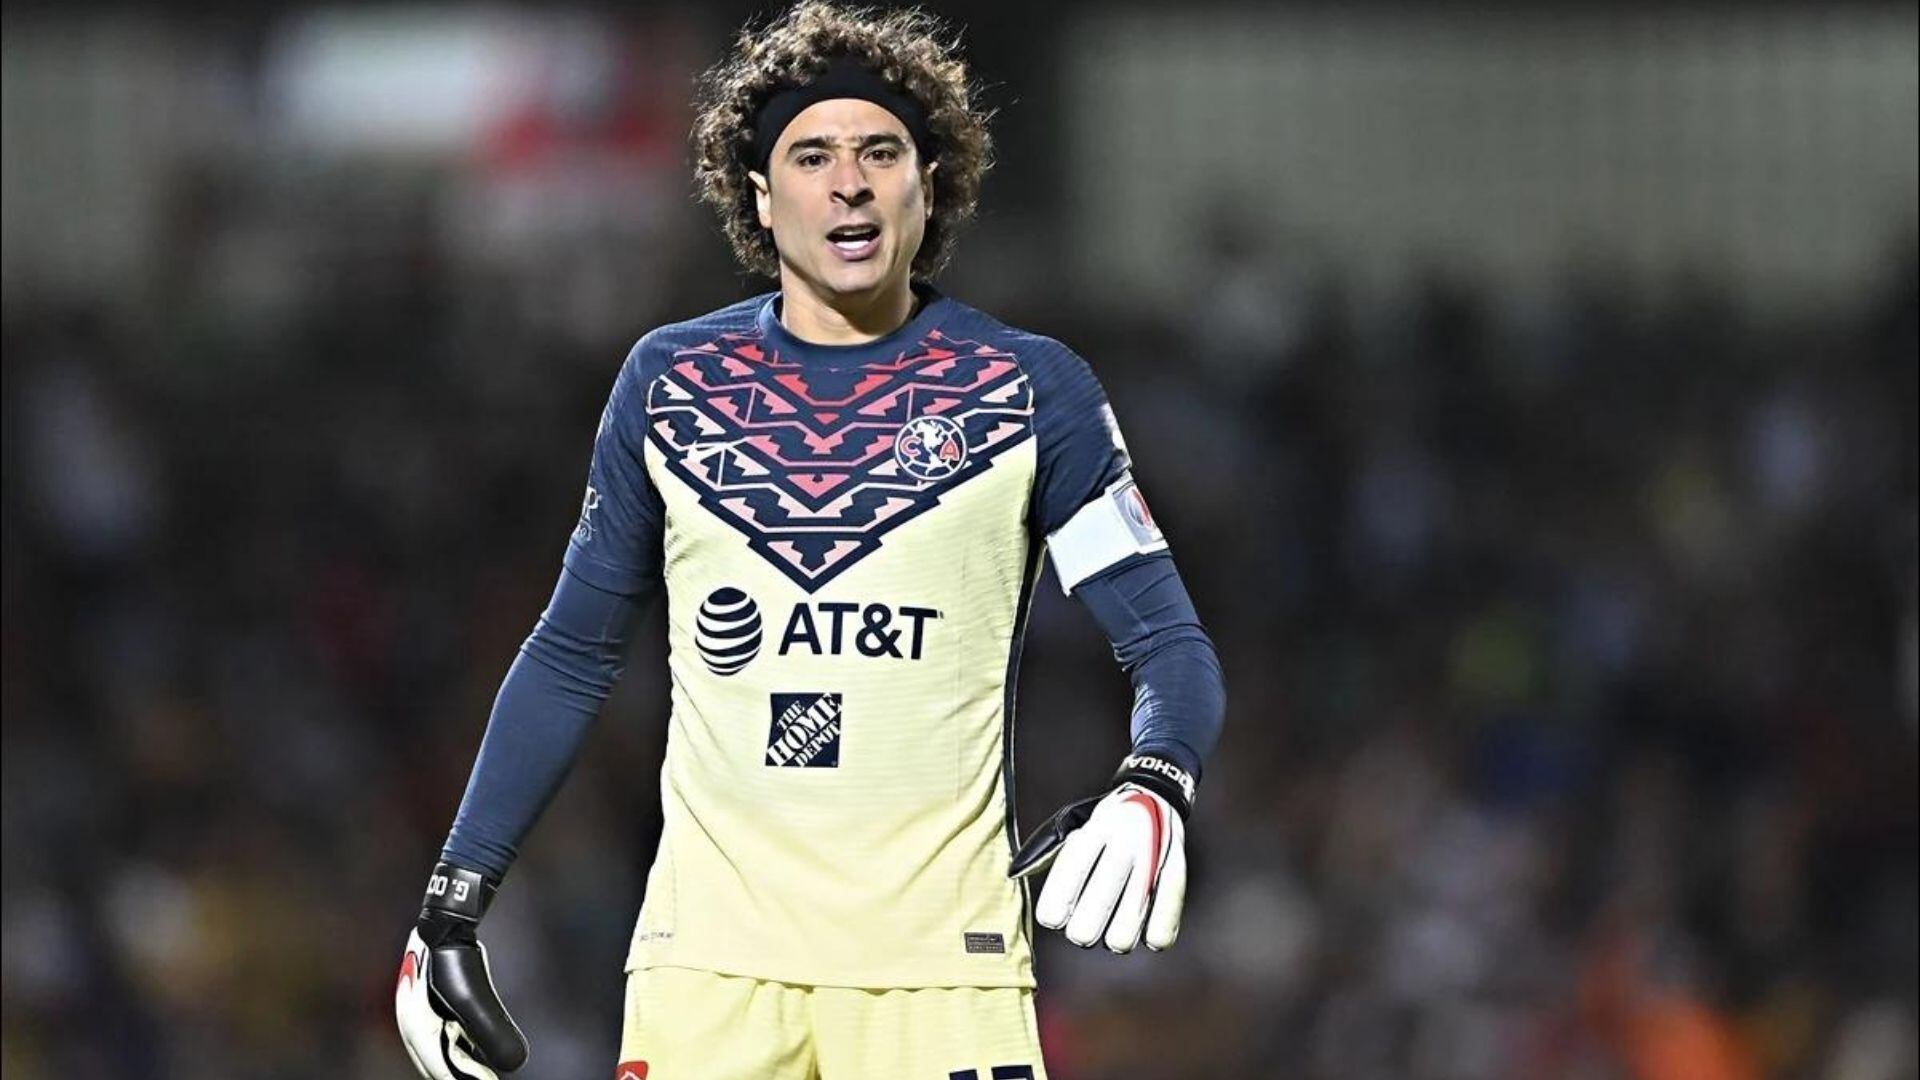 The goalkeeper that Club América will sign now that Guillermo Ochoa will play in MLS